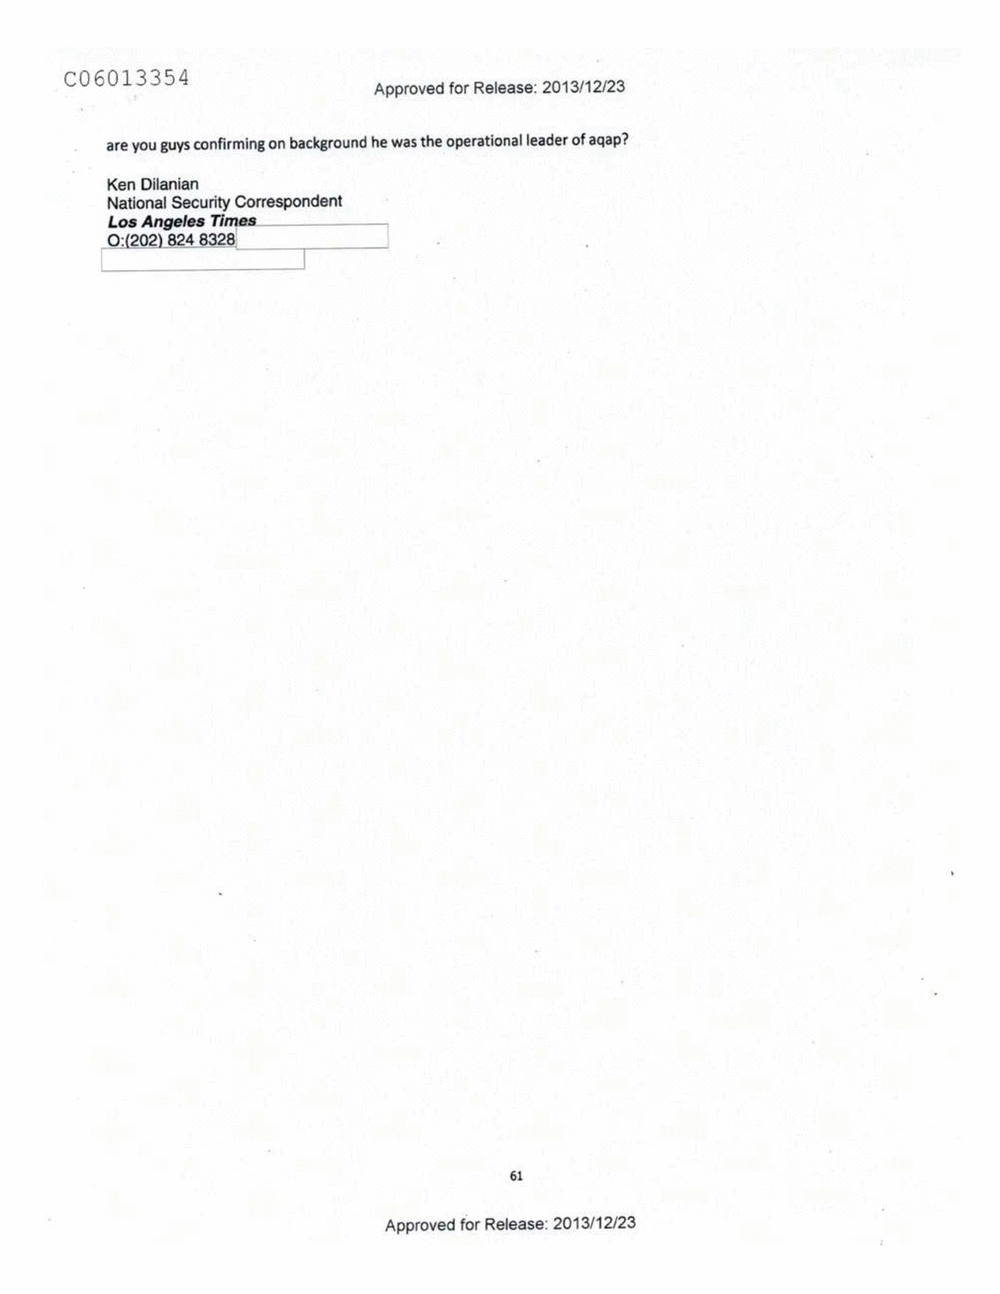 Page 269 from Email Correspondence Between Reporters and CIA Flacks